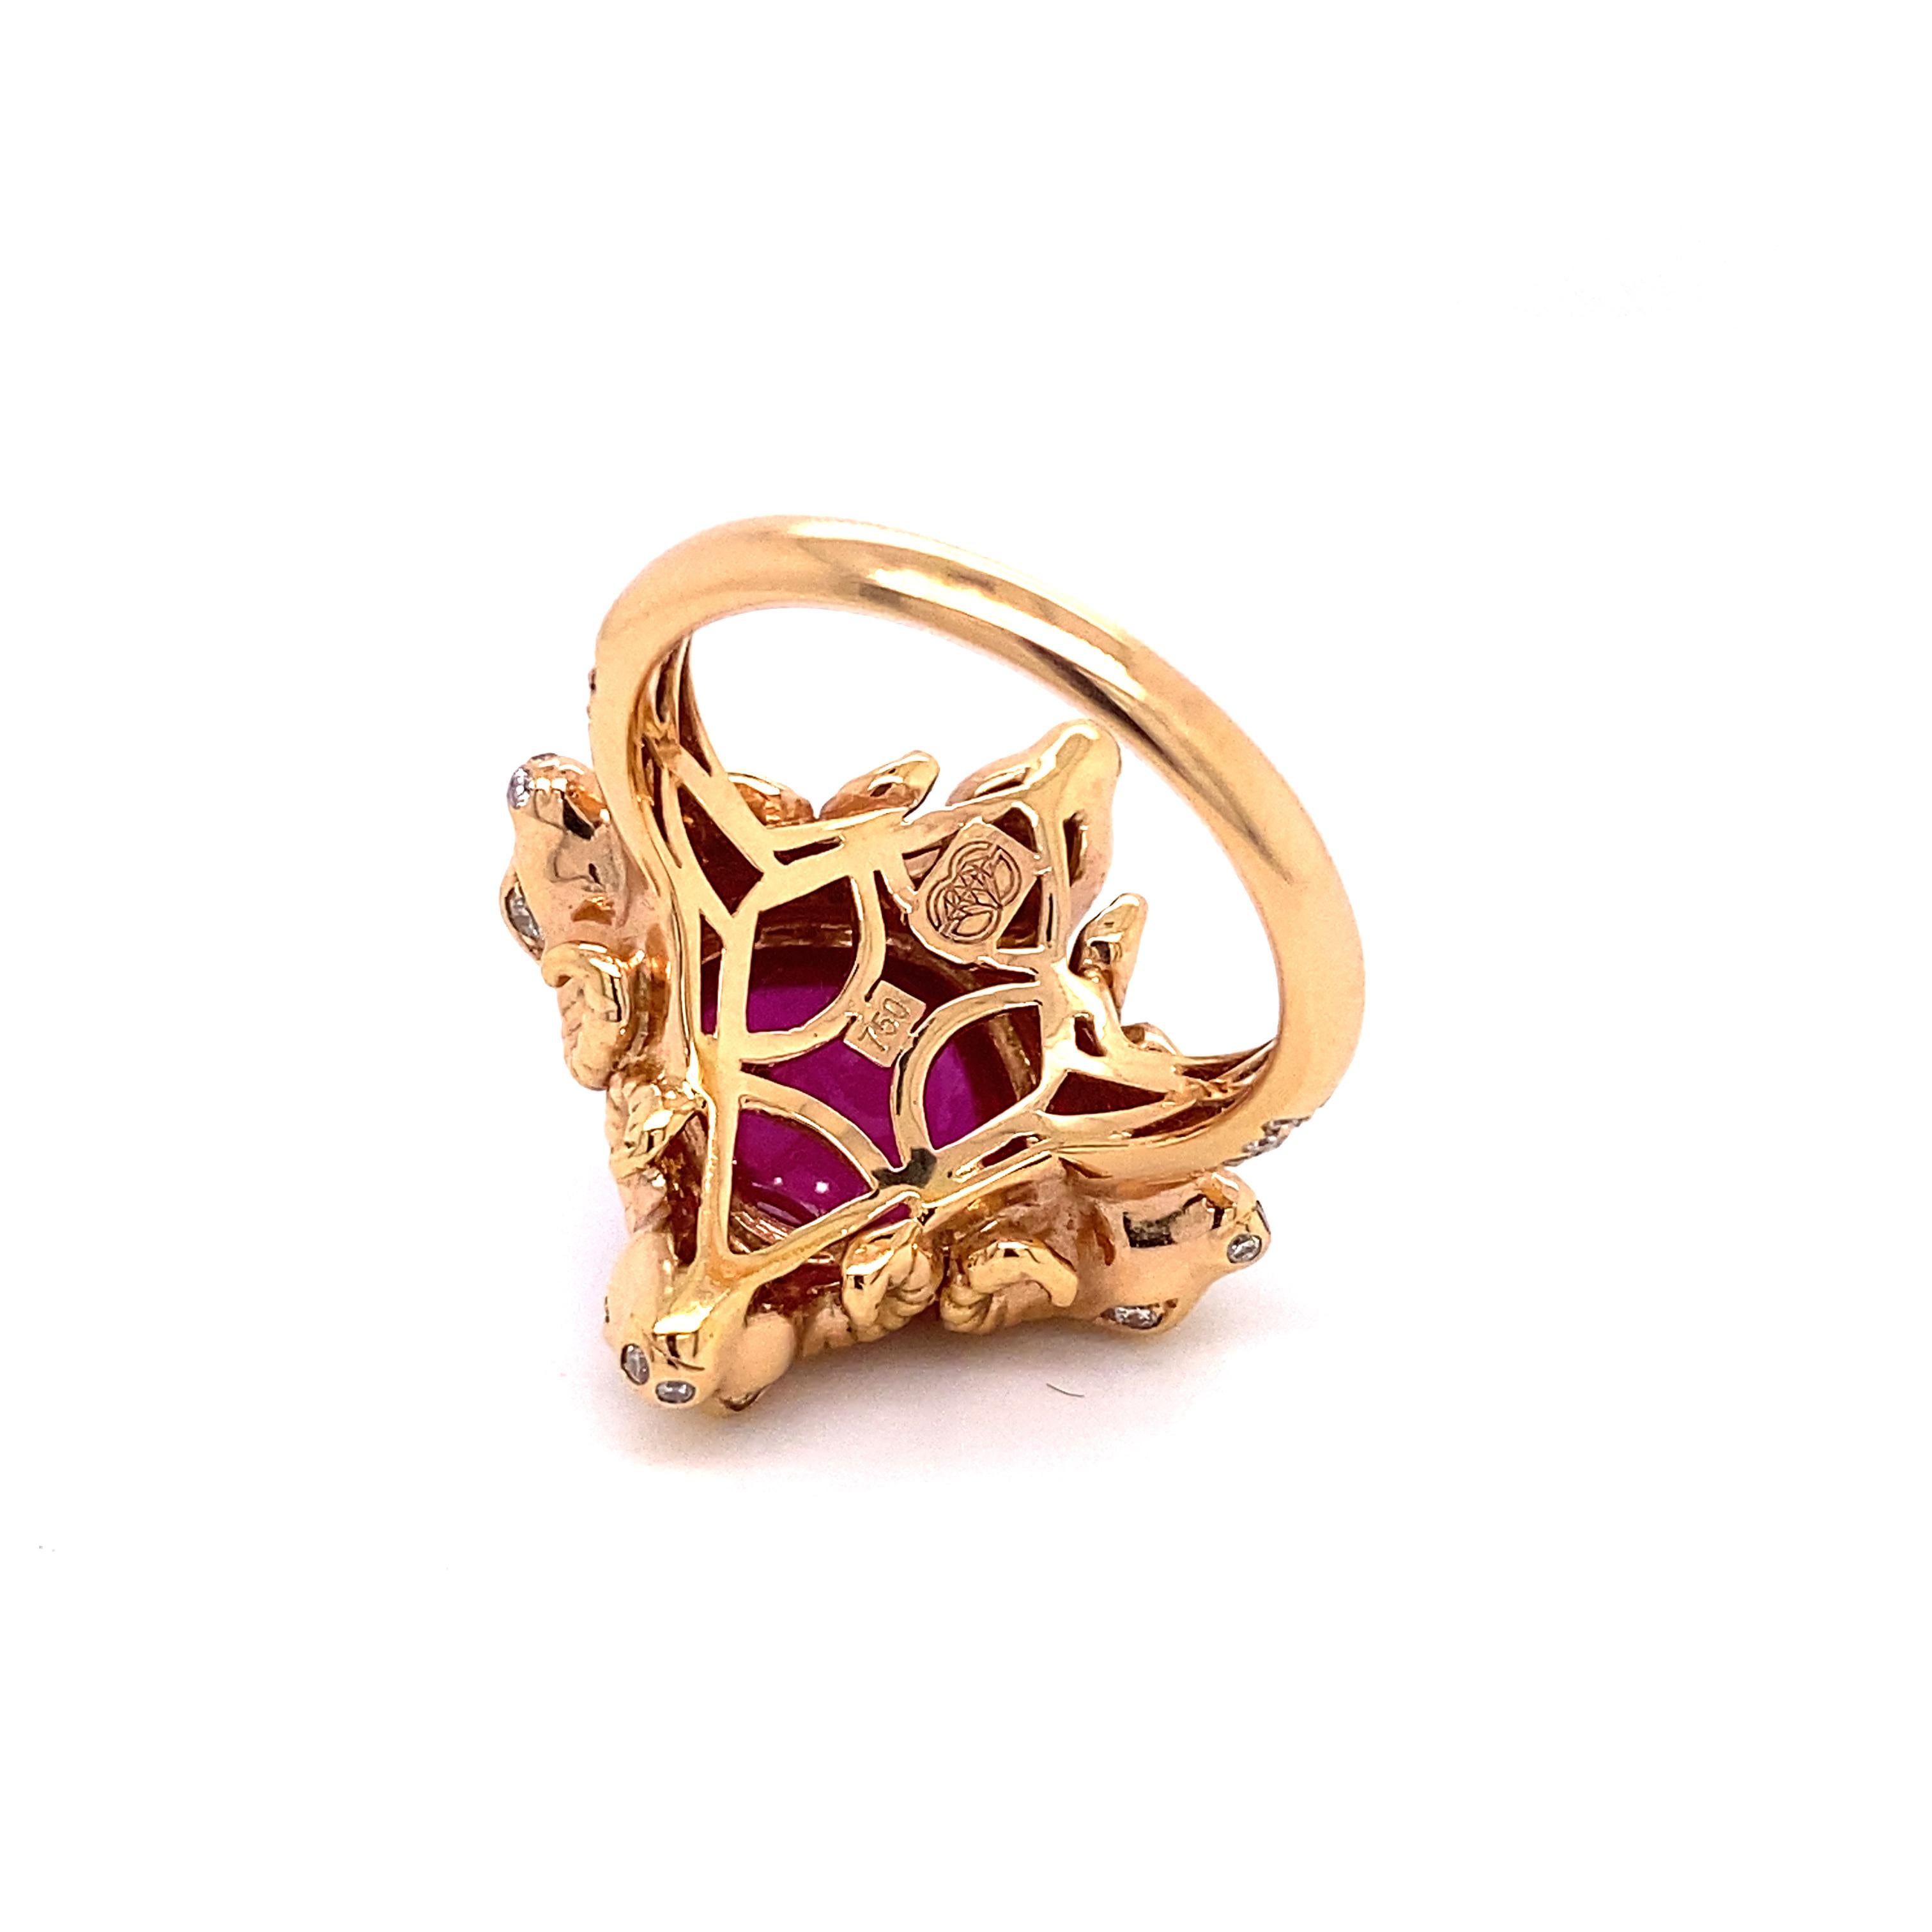 4.93 Carat Ruby Cabochon Ring in 18 Karat Rose Gold In Excellent Condition For Sale In Los Angeles, CA